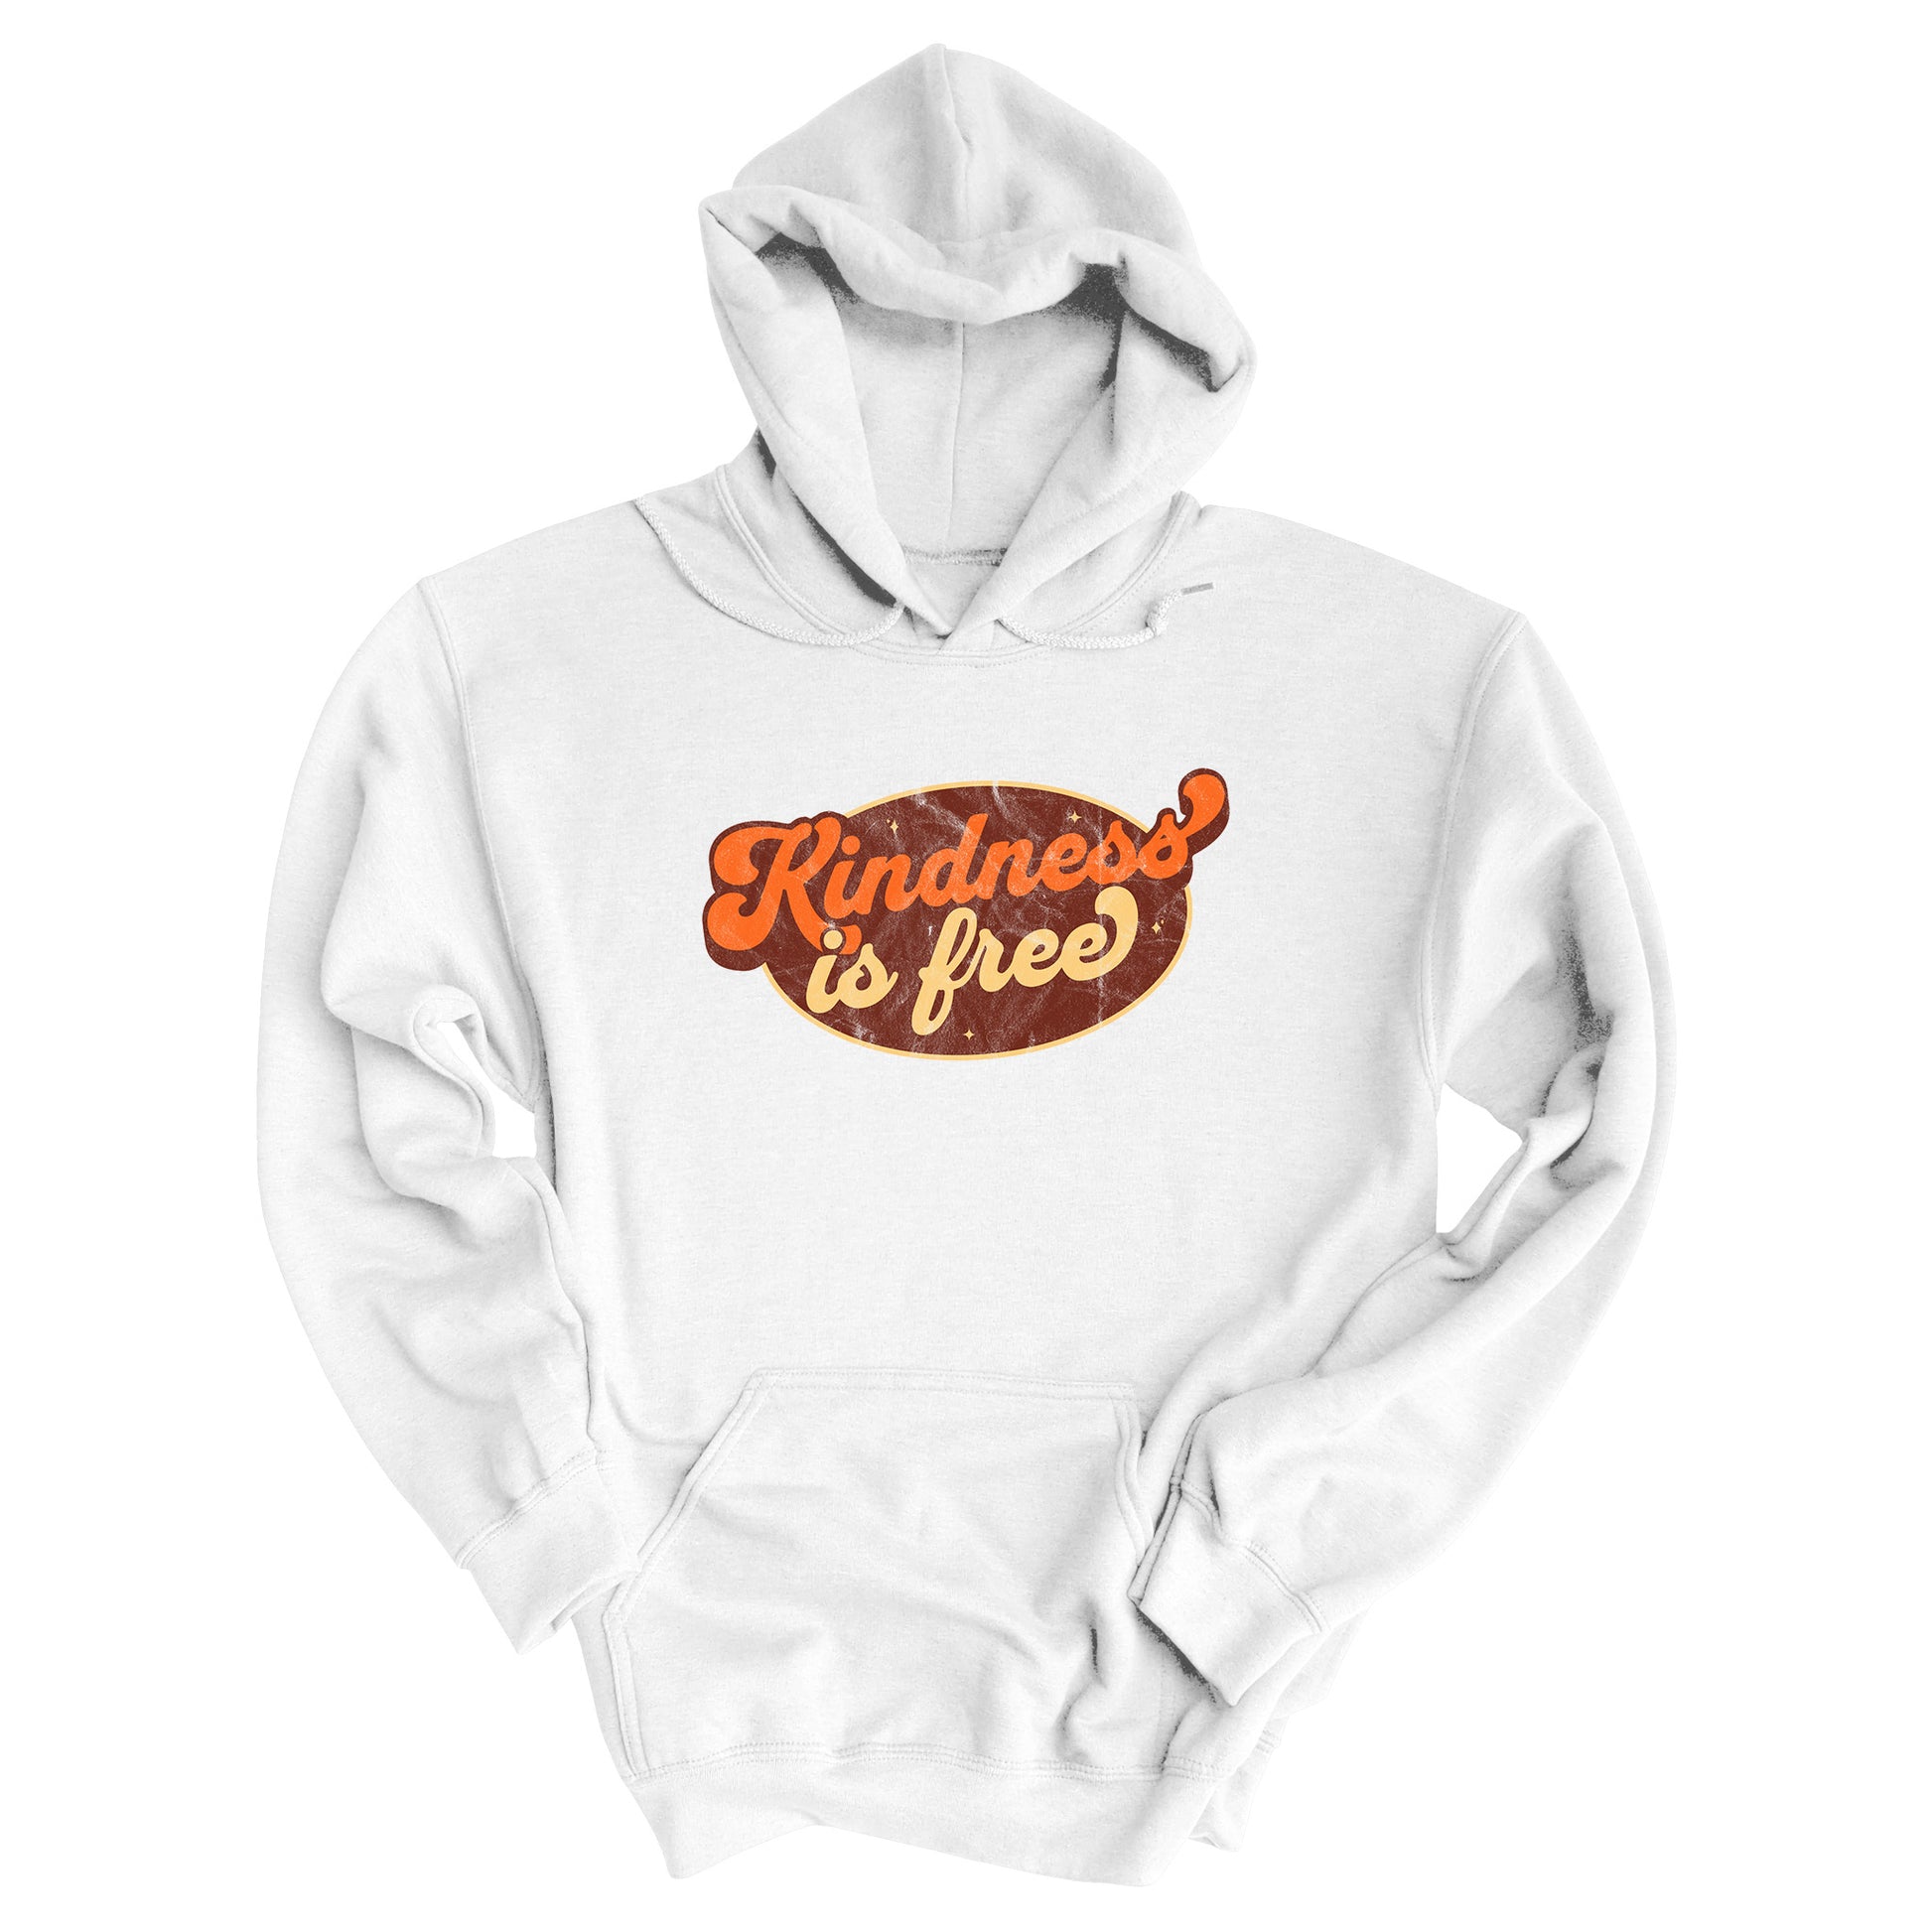 White unisex hoodie with a retro graphic that says “Kindness is free.” The text is in a script font with a brown oval behind it. The “k” and the “s” in the word “Kindness” are not contained inside the oval. The graphic is also distressed to add to the retro feel.